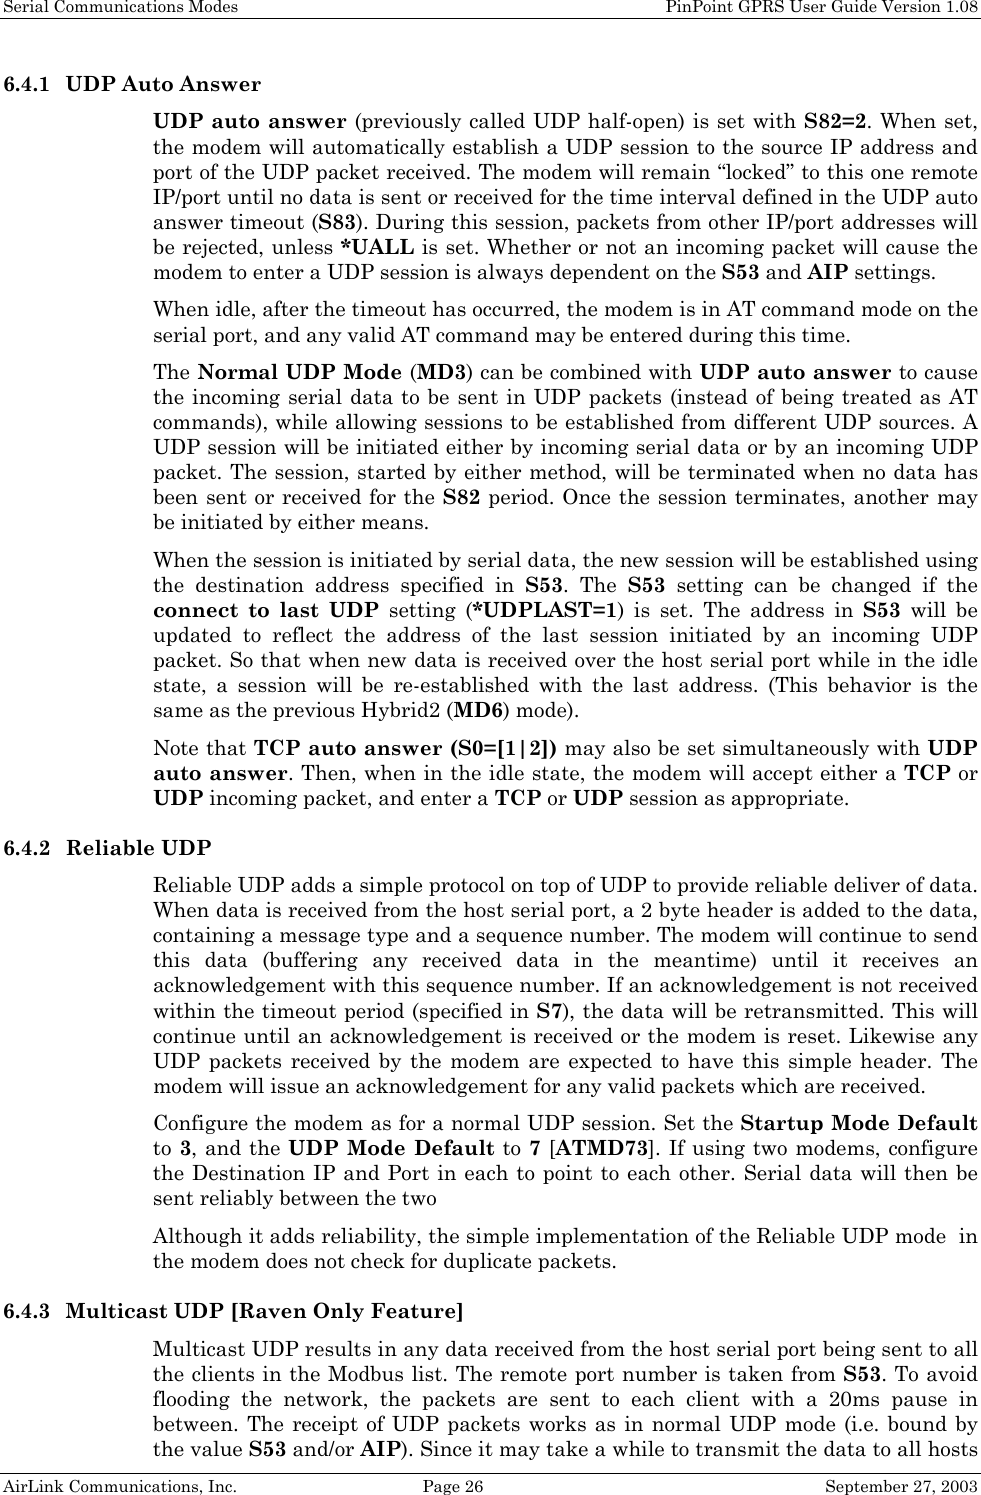 Serial Communications Modes    PinPoint GPRS User Guide Version 1.08 AirLink Communications, Inc.  Page 26  September 27, 2003 6.4.1 UDP Auto Answer UDP auto answer (previously called UDP half-open) is set with S82=2. When set, the modem will automatically establish a UDP session to the source IP address and port of the UDP packet received. The modem will remain “locked” to this one remote IP/port until no data is sent or received for the time interval defined in the UDP auto answer timeout (S83). During this session, packets from other IP/port addresses will be rejected, unless *UALL is set. Whether or not an incoming packet will cause the modem to enter a UDP session is always dependent on the S53 and AIP settings. When idle, after the timeout has occurred, the modem is in AT command mode on the serial port, and any valid AT command may be entered during this time. The Normal UDP Mode (MD3) can be combined with UDP auto answer to cause the incoming serial data to be sent in UDP packets (instead of being treated as AT commands), while allowing sessions to be established from different UDP sources. A UDP session will be initiated either by incoming serial data or by an incoming UDP packet. The session, started by either method, will be terminated when no data has been sent or received for the S82 period. Once the session terminates, another may be initiated by either means. When the session is initiated by serial data, the new session will be established using the destination address specified in S53. The S53 setting can be changed if the connect to last UDP setting (*UDPLAST=1) is set. The address in S53 will be updated to reflect the address of the last session initiated by an incoming UDP packet. So that when new data is received over the host serial port while in the idle state, a session will be re-established with the last address. (This behavior is the same as the previous Hybrid2 (MD6) mode). Note that TCP auto answer (S0=[1|2]) may also be set simultaneously with UDP auto answer. Then, when in the idle state, the modem will accept either a TCP or UDP incoming packet, and enter a TCP or UDP session as appropriate. 6.4.2 Reliable UDP Reliable UDP adds a simple protocol on top of UDP to provide reliable deliver of data. When data is received from the host serial port, a 2 byte header is added to the data, containing a message type and a sequence number. The modem will continue to send this data (buffering any received data in the meantime) until it receives an acknowledgement with this sequence number. If an acknowledgement is not received within the timeout period (specified in S7), the data will be retransmitted. This will continue until an acknowledgement is received or the modem is reset. Likewise any UDP packets received by the modem are expected to have this simple header. The modem will issue an acknowledgement for any valid packets which are received.  Configure the modem as for a normal UDP session. Set the Startup Mode Default to 3, and the UDP Mode Default to 7 [ATMD73]. If using two modems, configure the Destination IP and Port in each to point to each other. Serial data will then be sent reliably between the two Although it adds reliability, the simple implementation of the Reliable UDP mode  in the modem does not check for duplicate packets. 6.4.3 Multicast UDP [Raven Only Feature] Multicast UDP results in any data received from the host serial port being sent to all the clients in the Modbus list. The remote port number is taken from S53. To avoid flooding the network, the packets are sent to each client with a 20ms pause in between. The receipt of UDP packets works as in normal UDP mode (i.e. bound by the value S53 and/or AIP). Since it may take a while to transmit the data to all hosts 